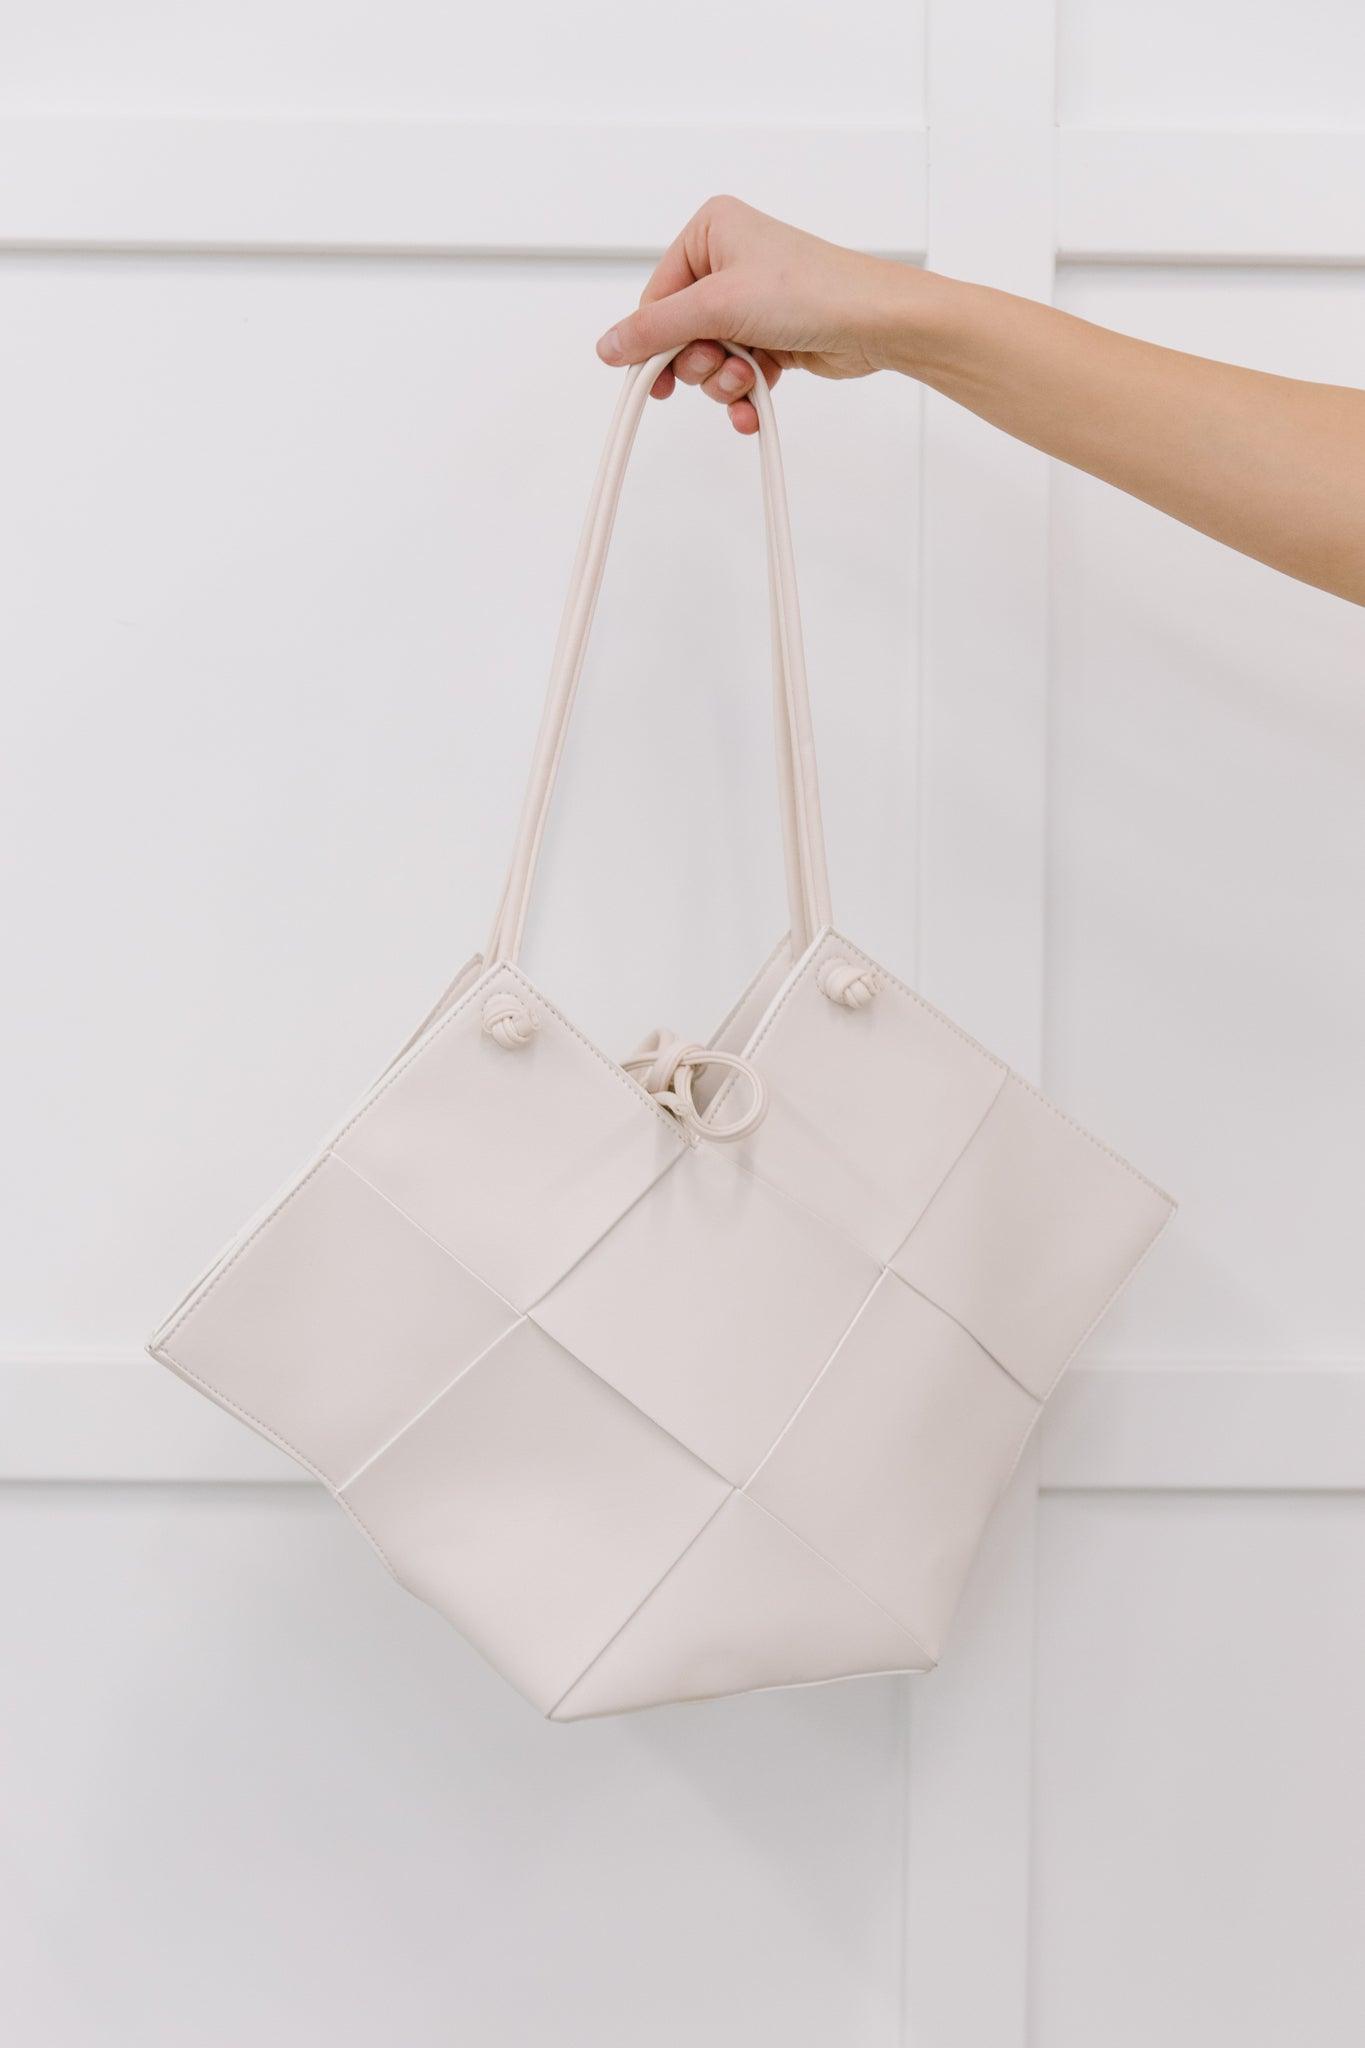 Woven Tote in White - The Fiery Jasmine